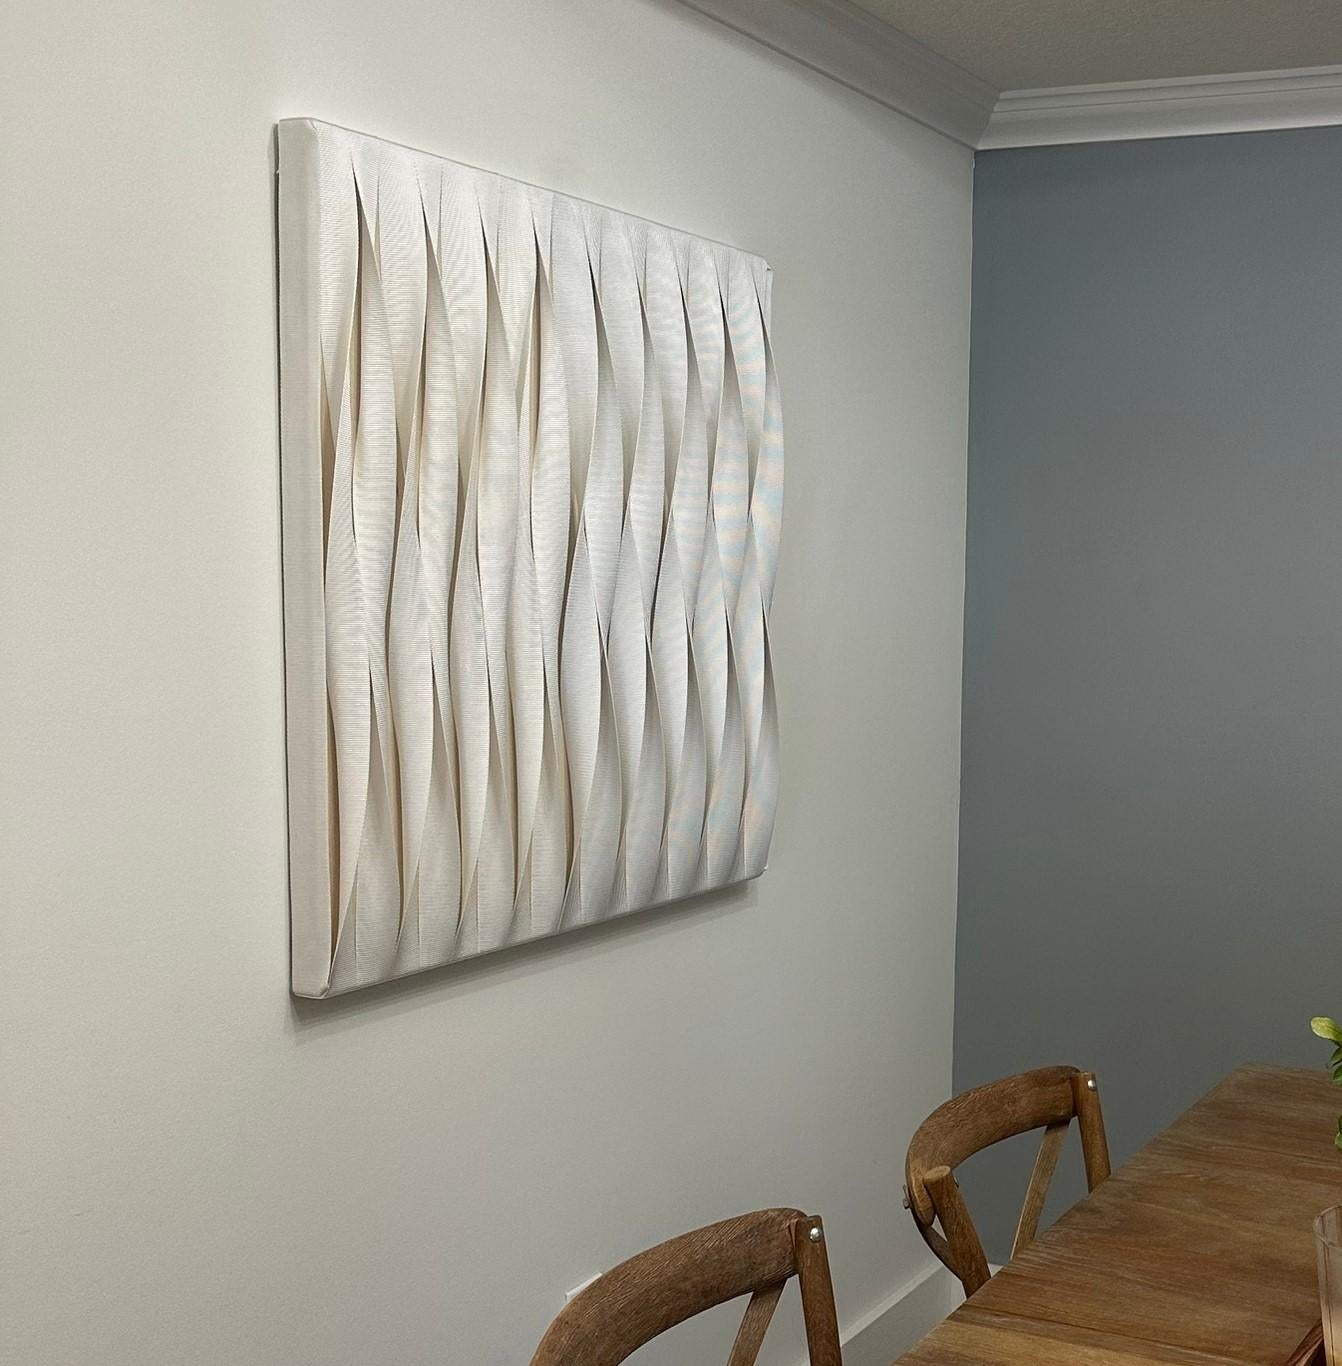 Elegant and simple abstract painting starring different geometric shapes combined by woven double ribbons, supported by a solid wood frame. A form that will shine in all types of environments thanks to its sobriety and infinite possibility of